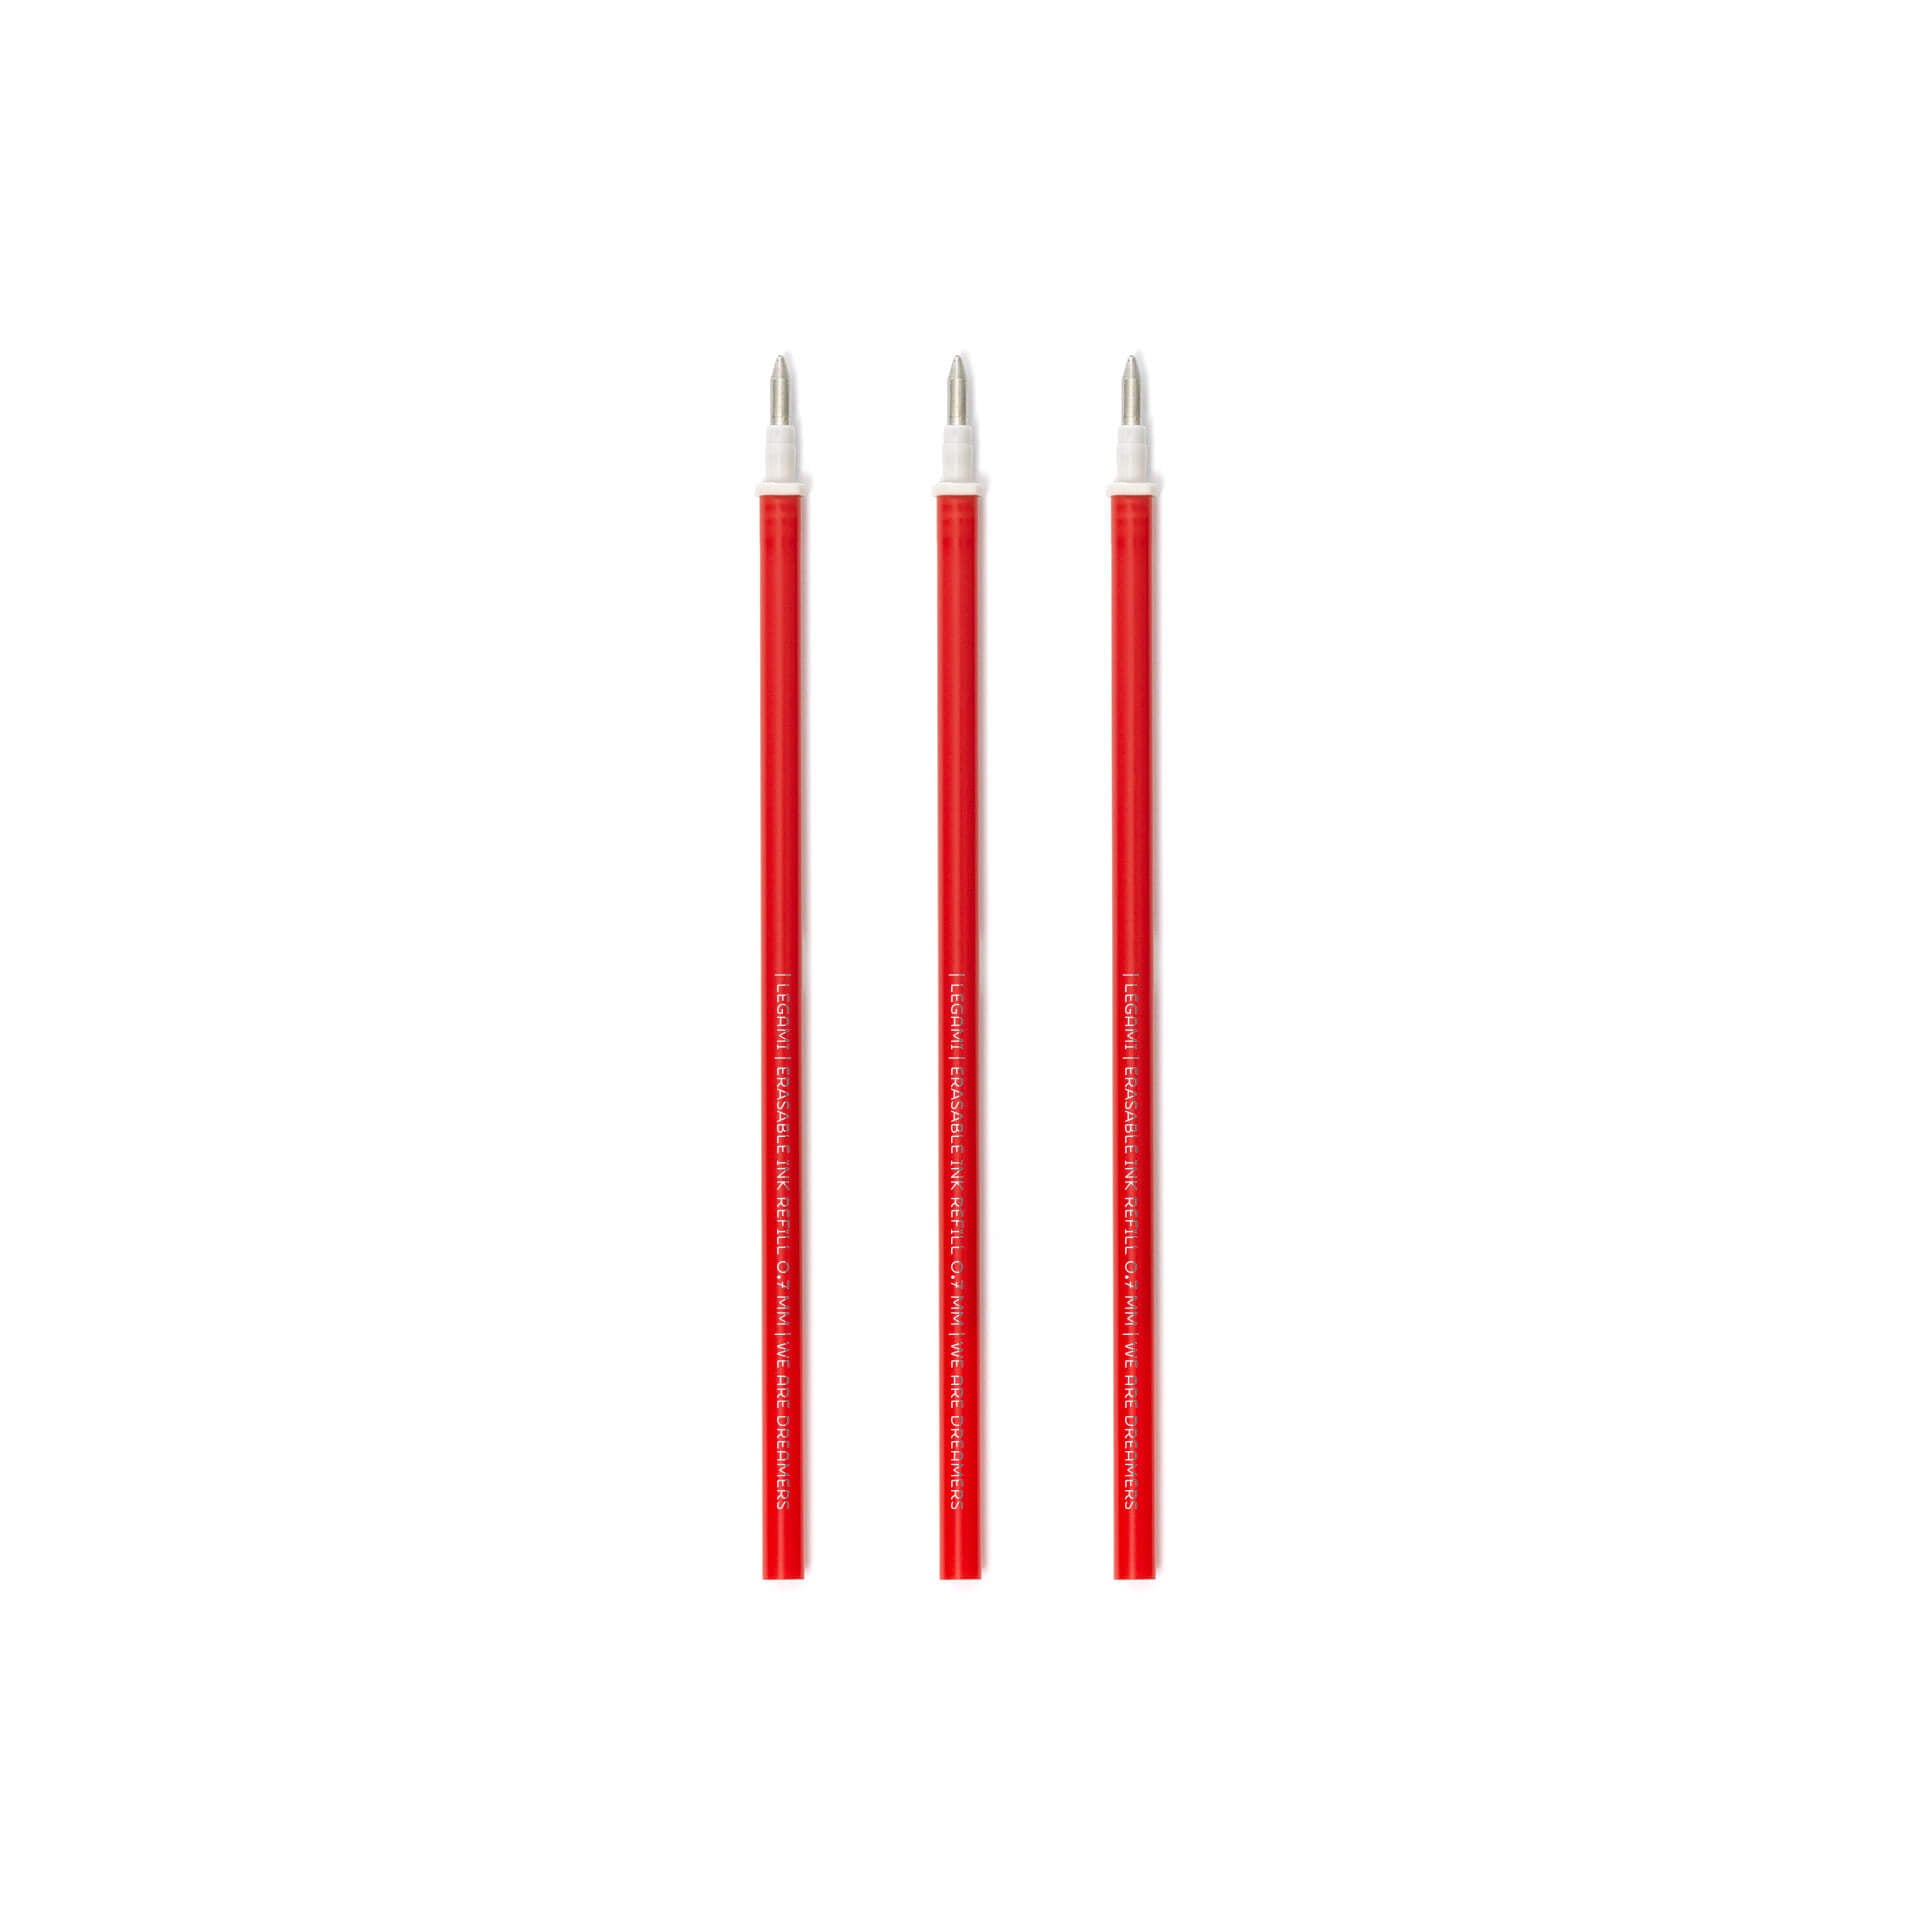 3 Red Legami Erasable Pen Refills without packaging